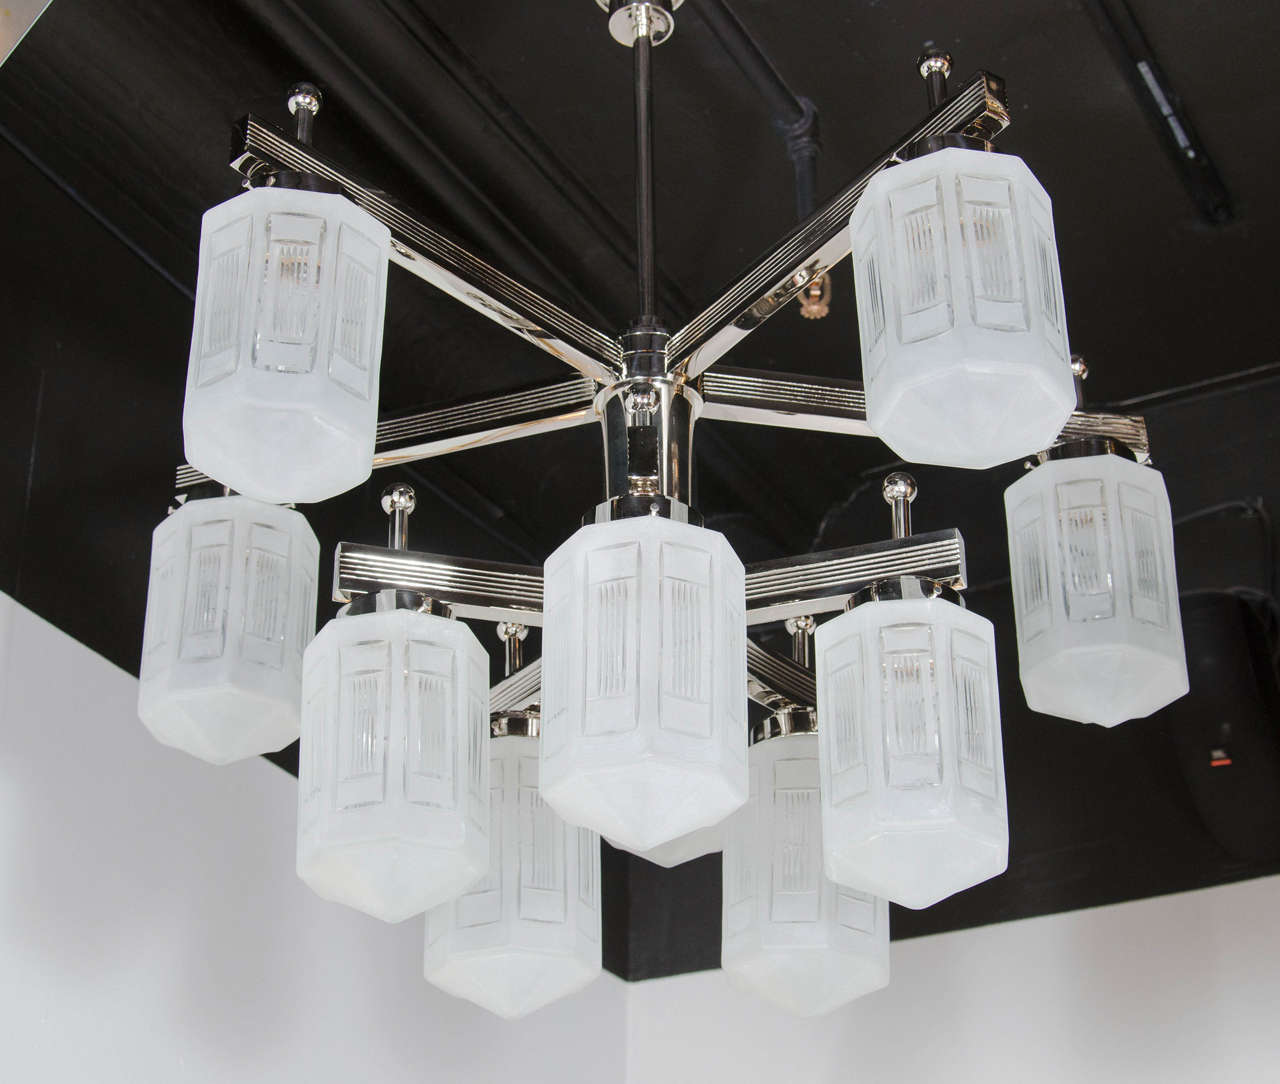 This graphic and elegant Art Deco style chandelier in polished nickel features ten arms attached to an angular geometric frame and nine relief etched frosted glass globes with intricate rectilinear concentric detailing. With its monochromatic palate